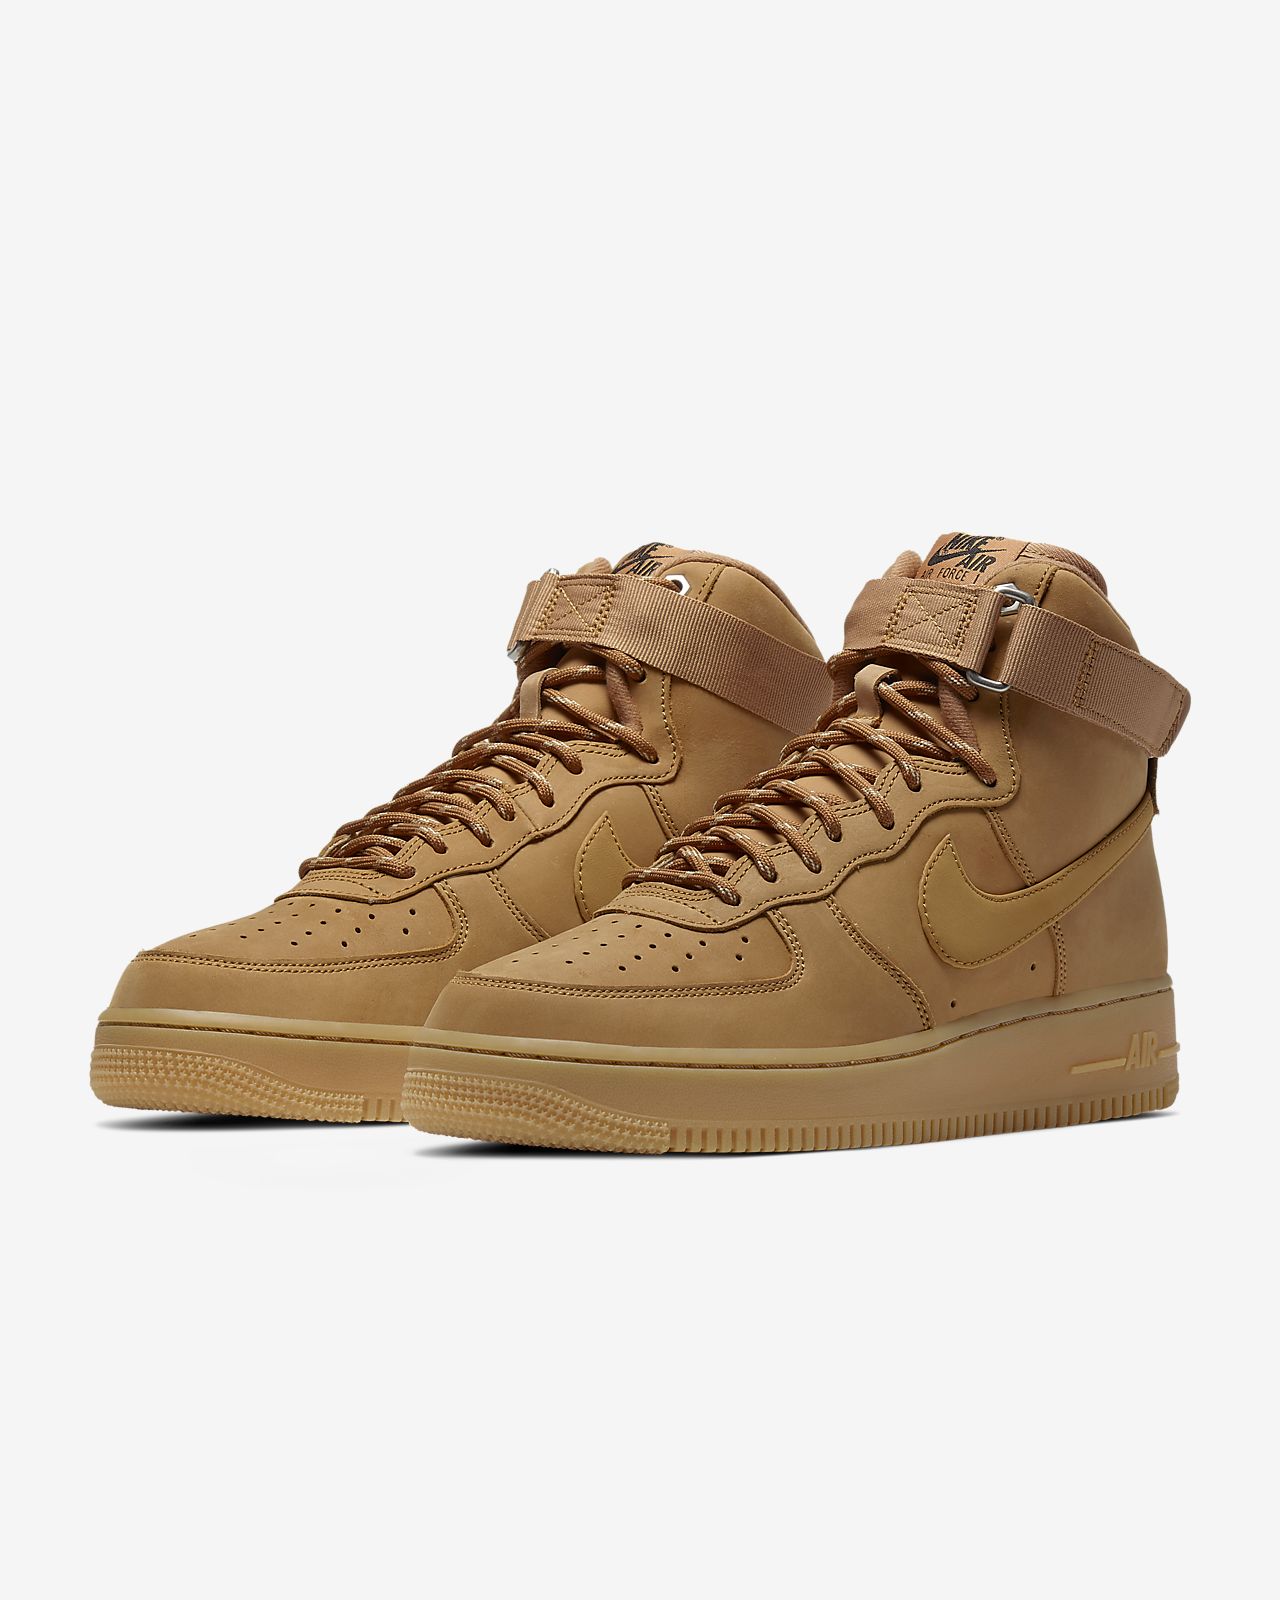 air force nike marron - 52% remise 